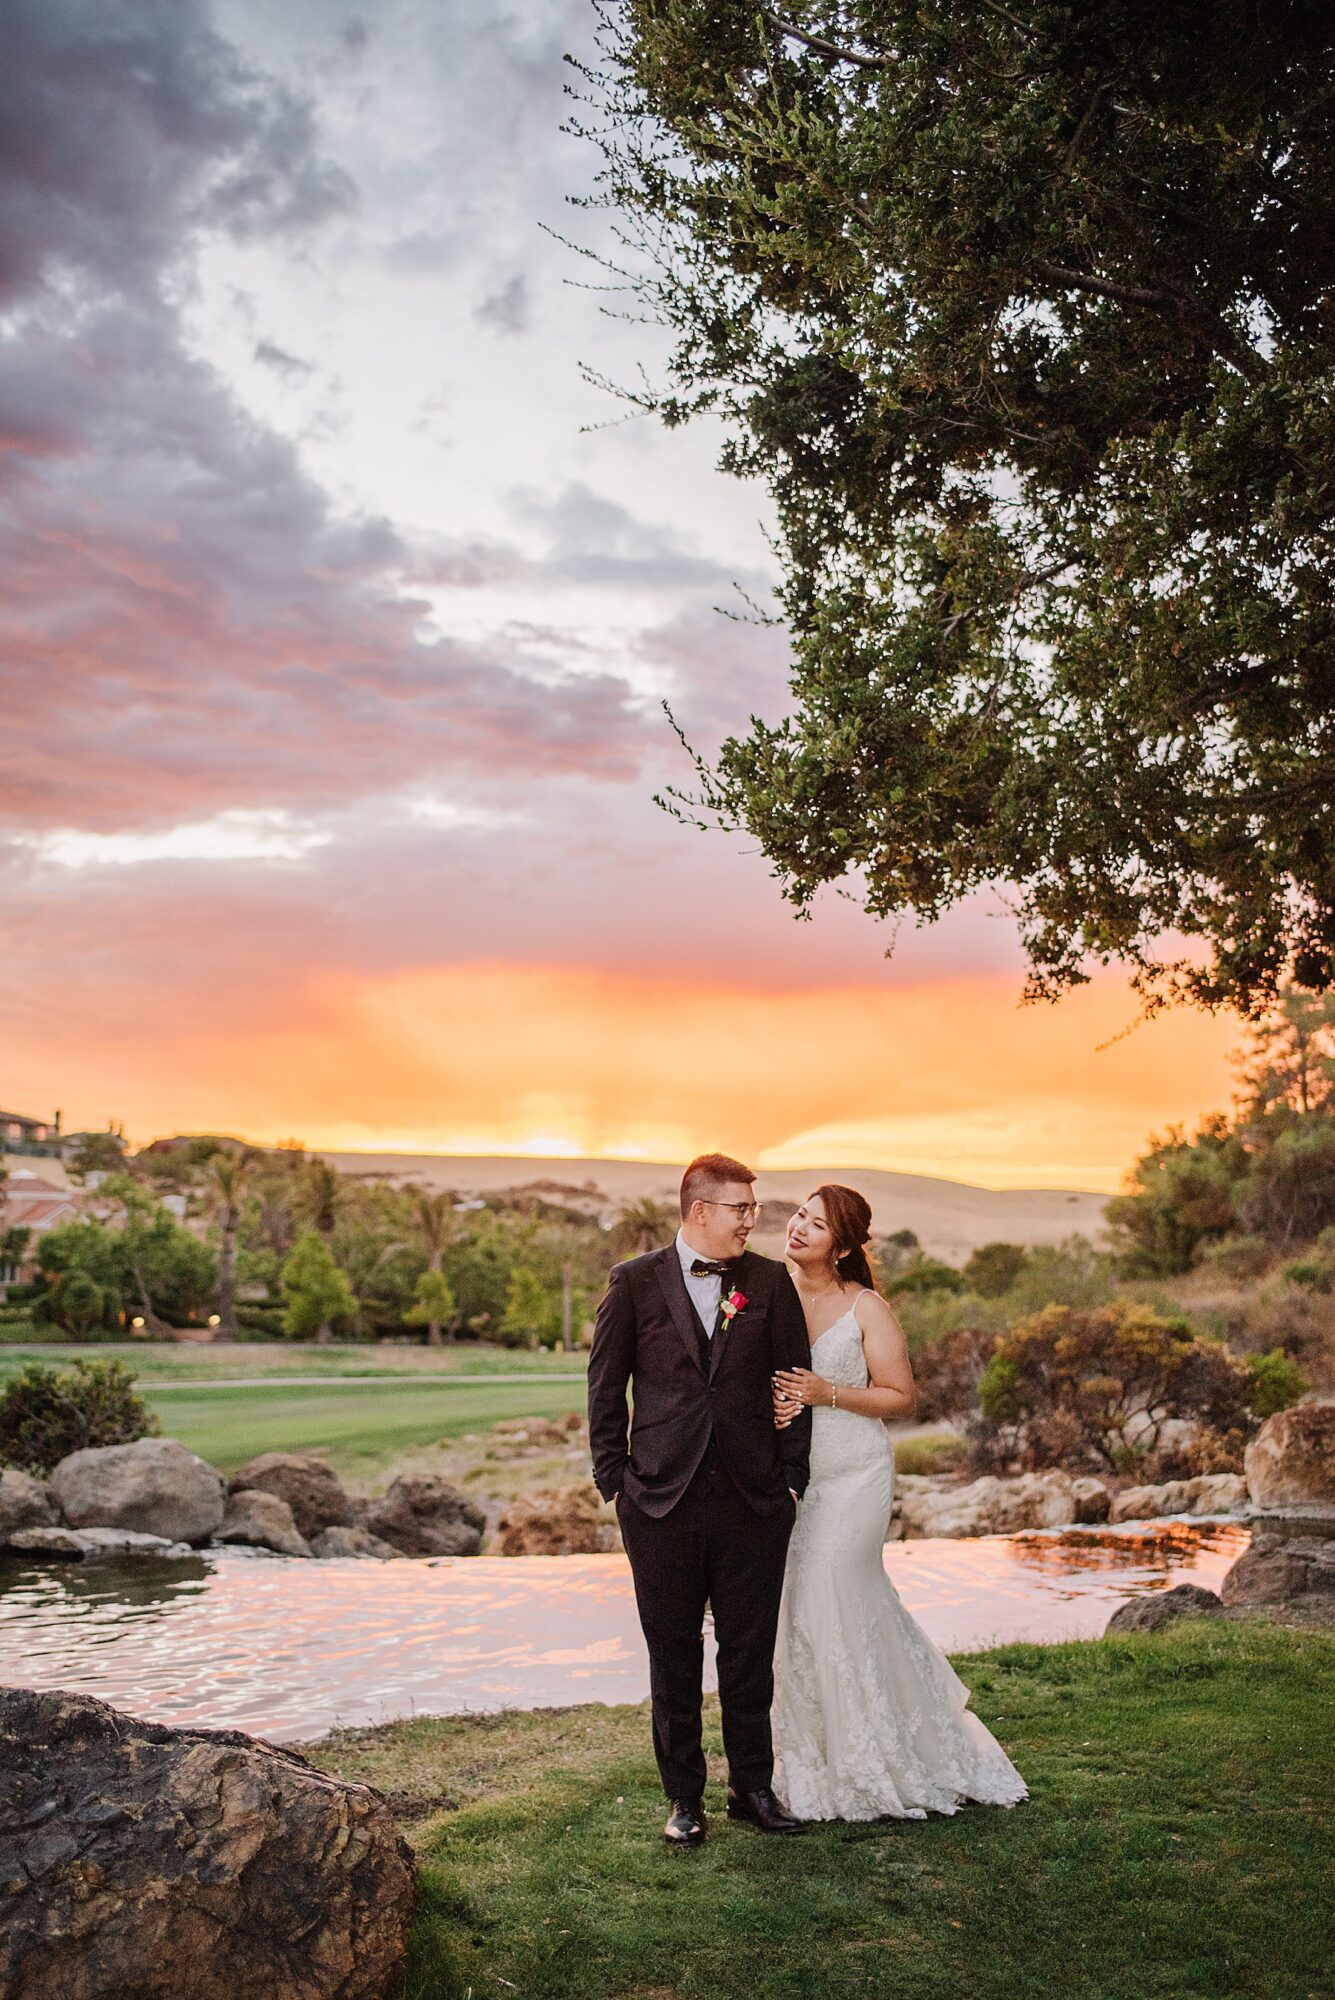 Nikkels Photography, a California wedding photographer, shares inspiration from this San Jose Chic Wedding that she captured.